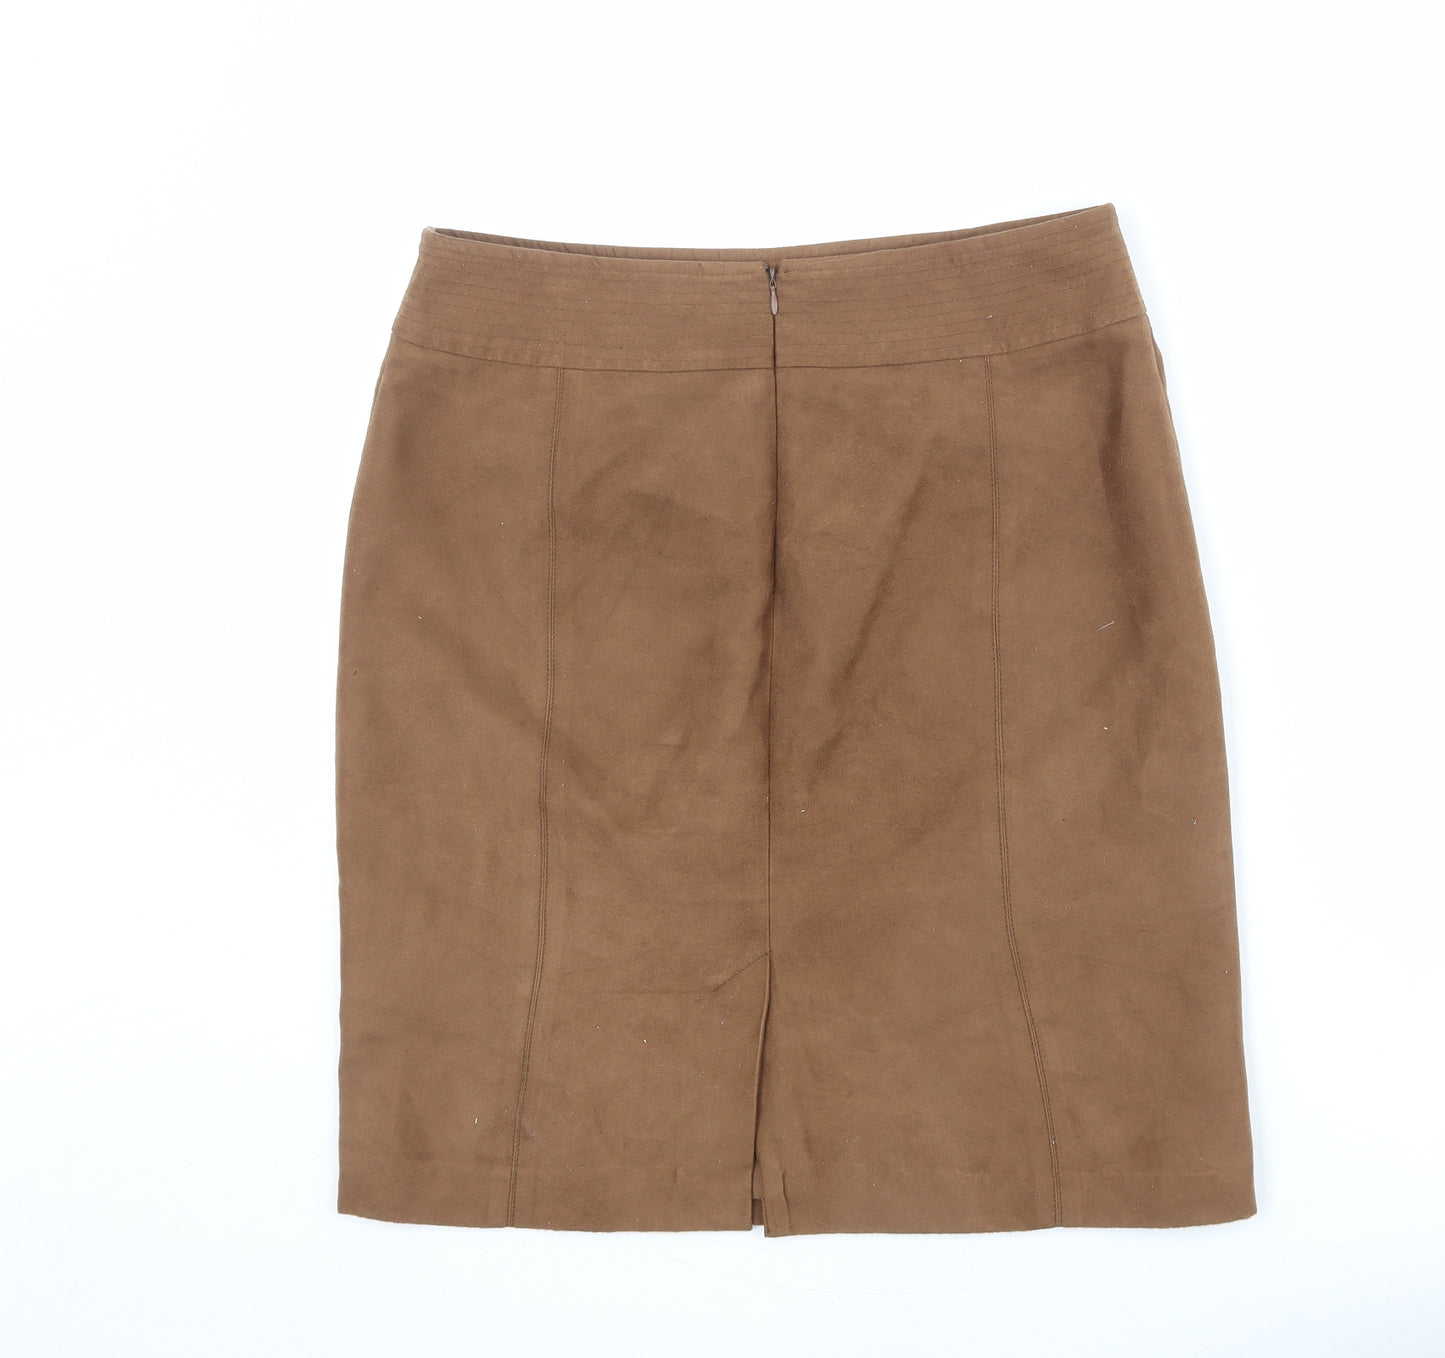 James Lakeland Womens Brown Polyester A-Line Skirt Size 14 Zip - Suede Effect